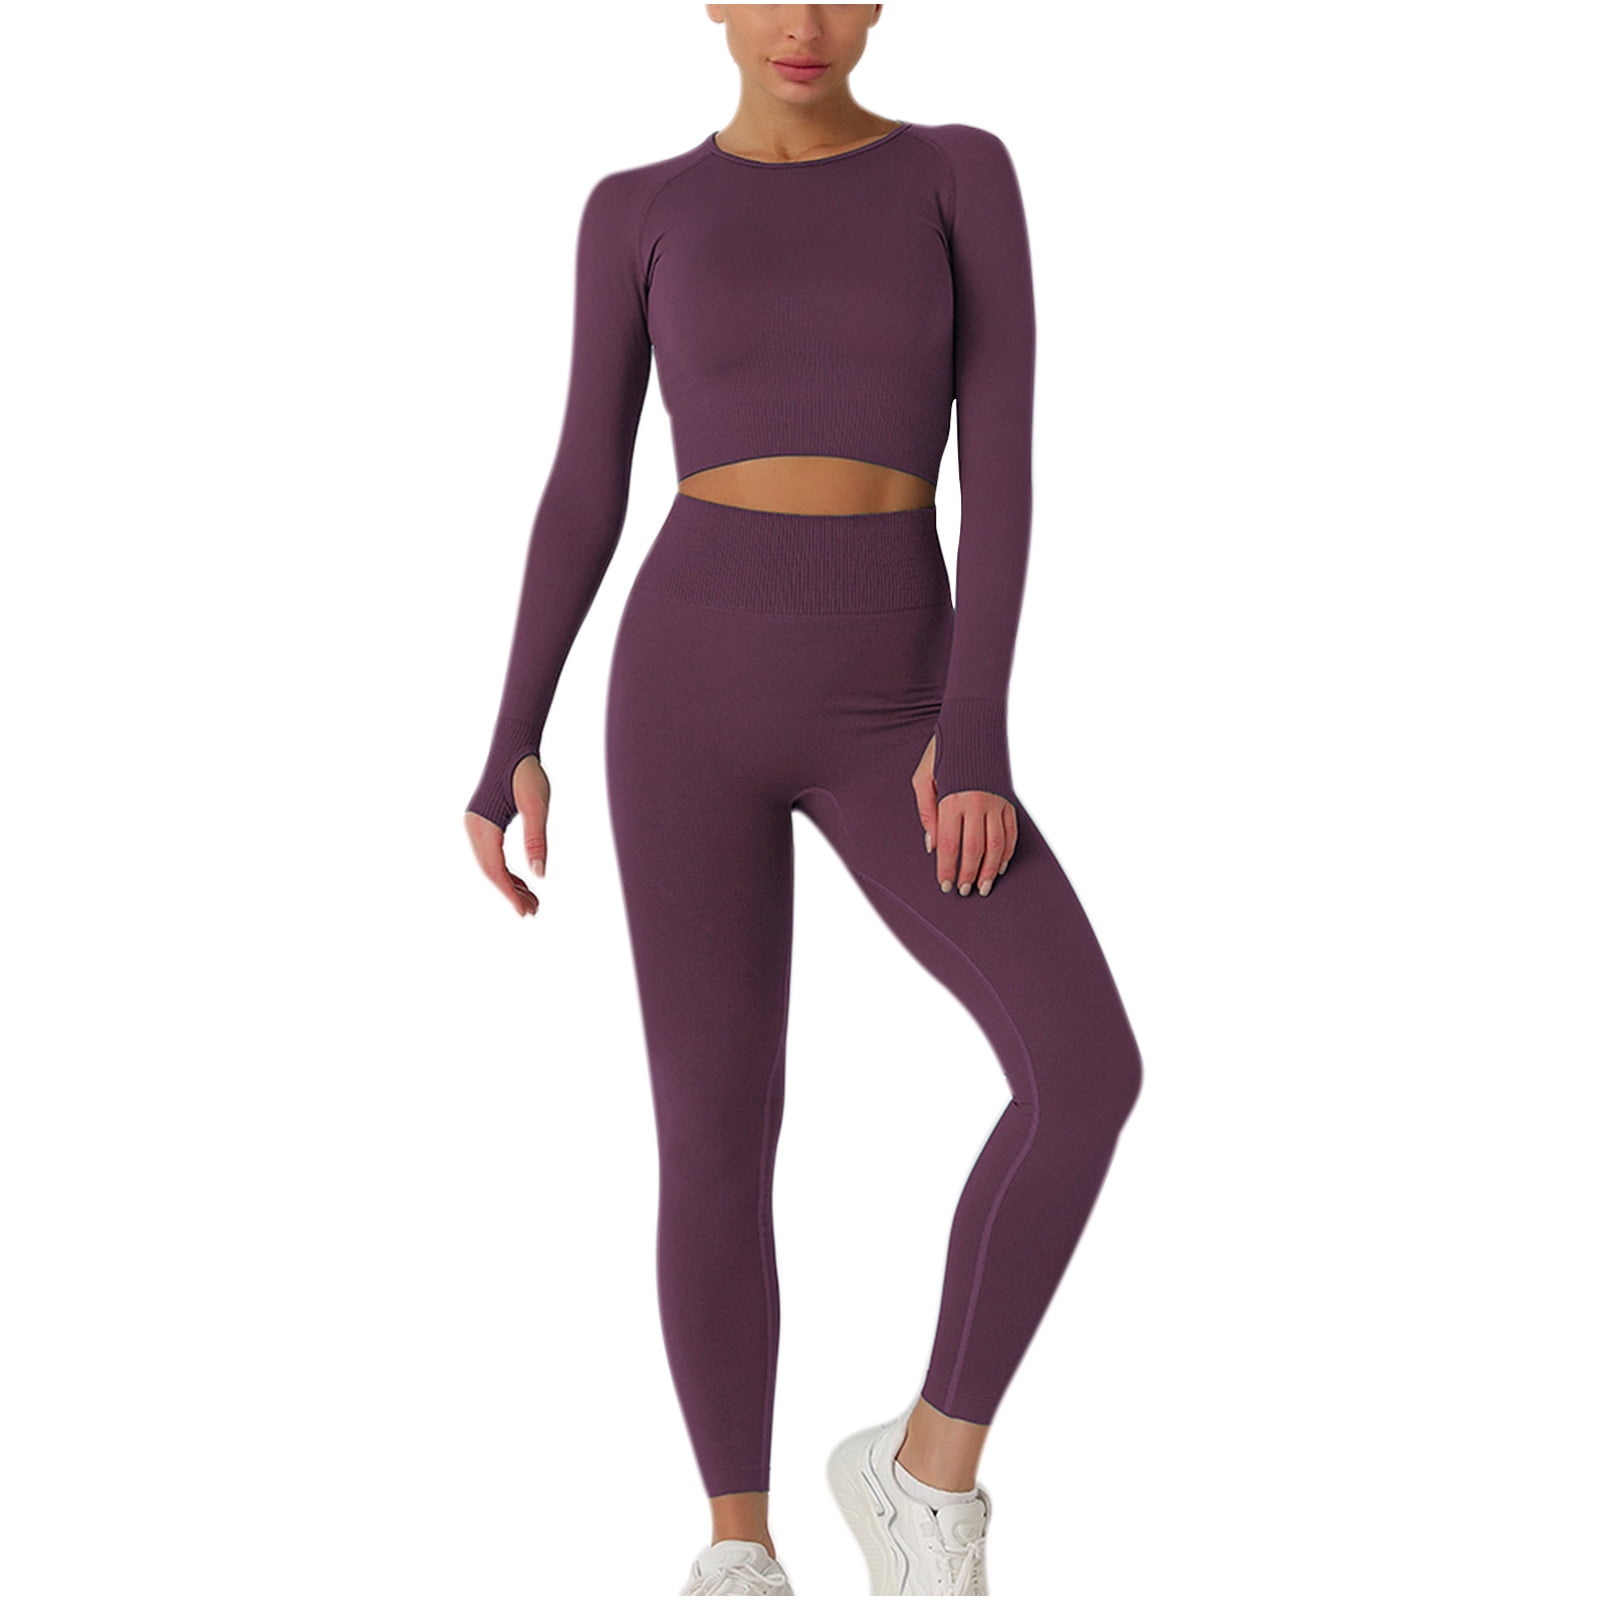 RQYYD On Clearance Workout Sets for Women High Waist Seamless Cute Yoga  Leggings Workout Sets Long Sleeve Crewneck Knit 2 Piece Gym Clothes Red L 